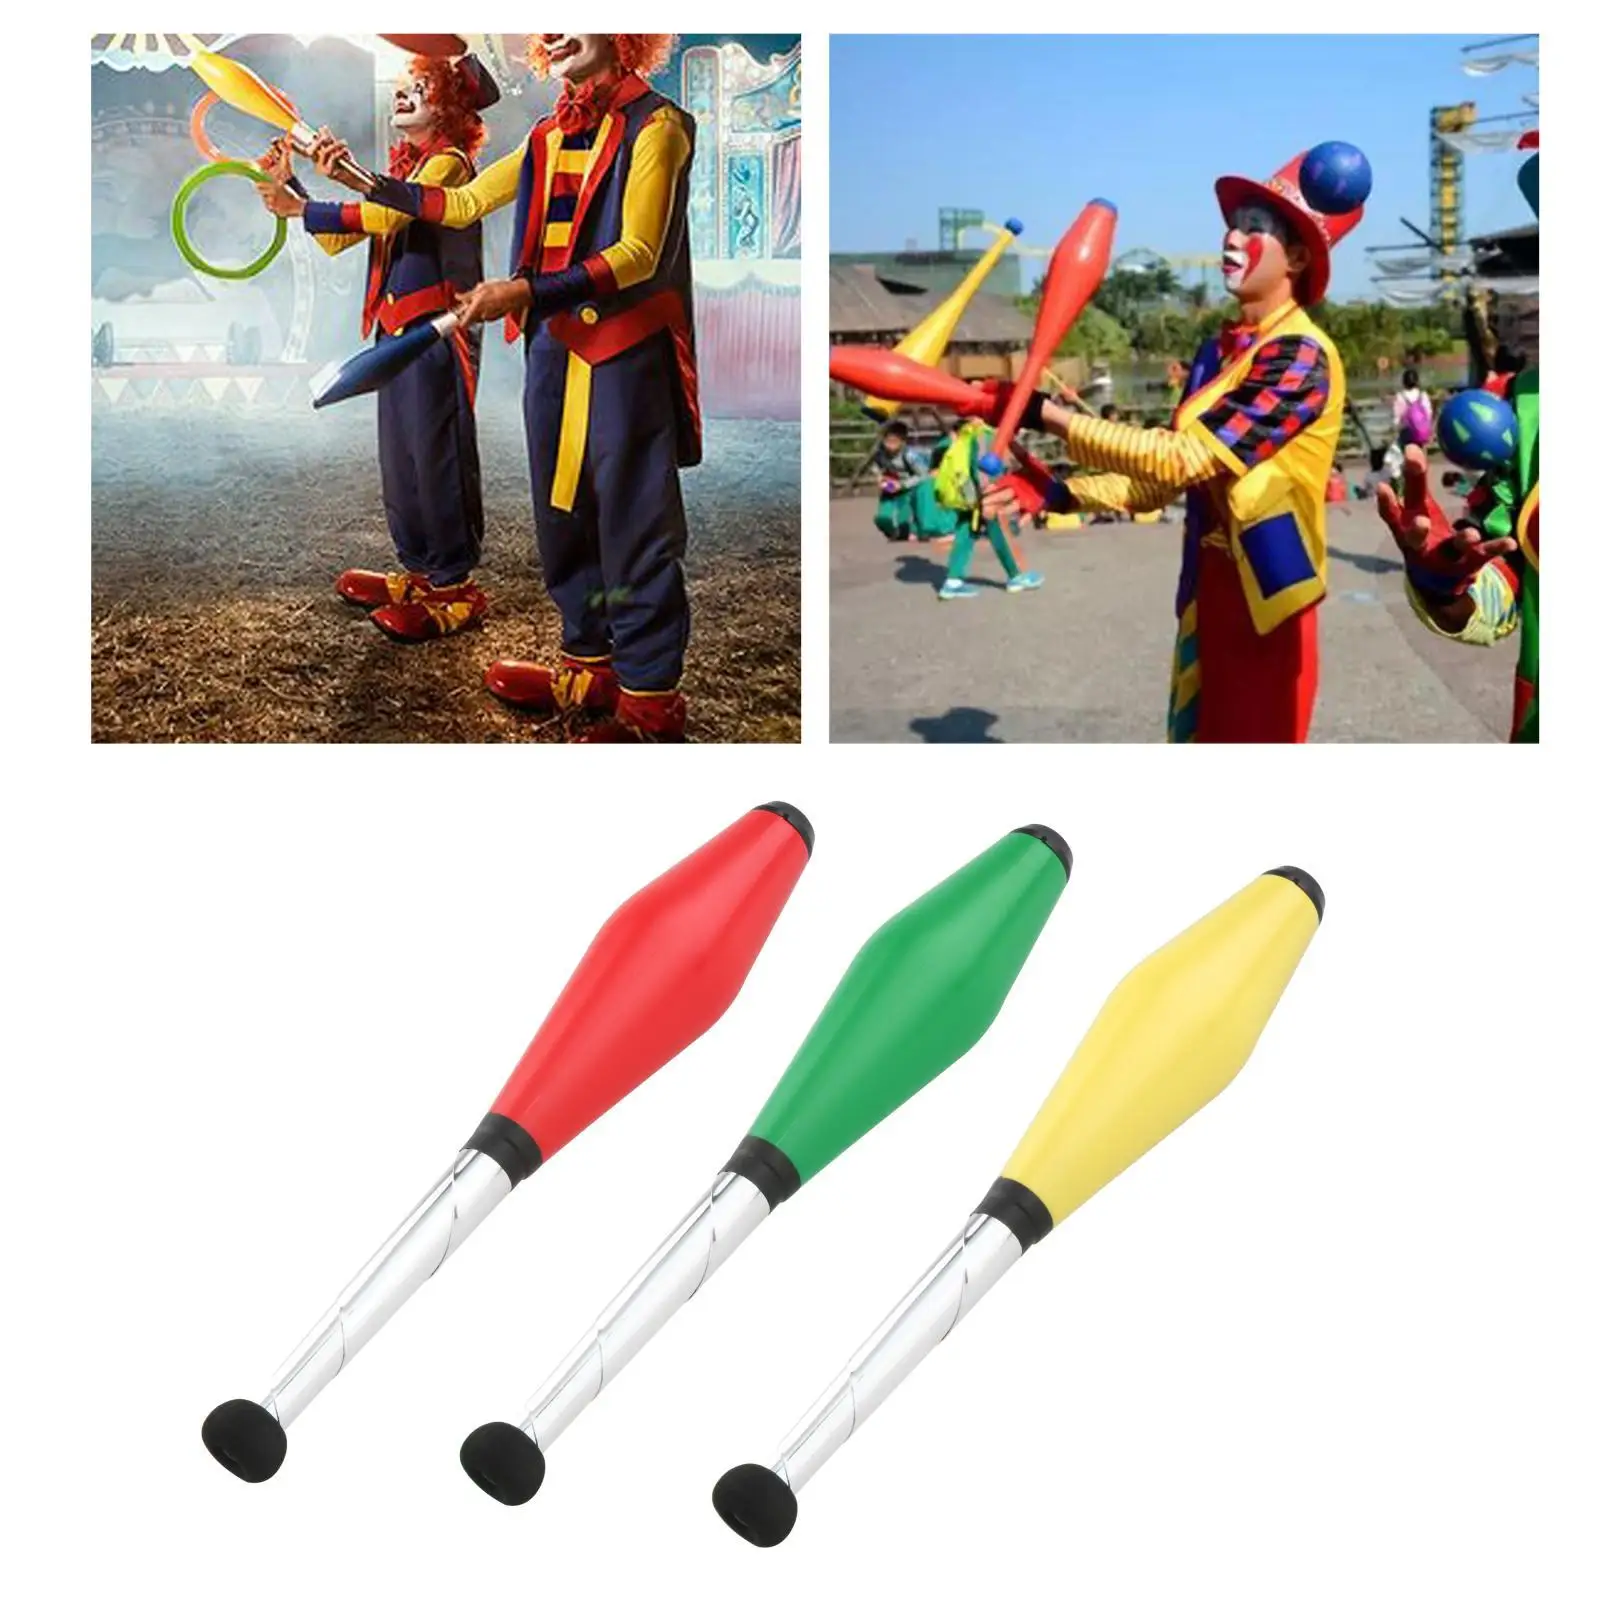 Pro Juggling Clubs Premium Sticks Pins Ultralight for Prop Kids Playing Toys Training Outdoor Beginner